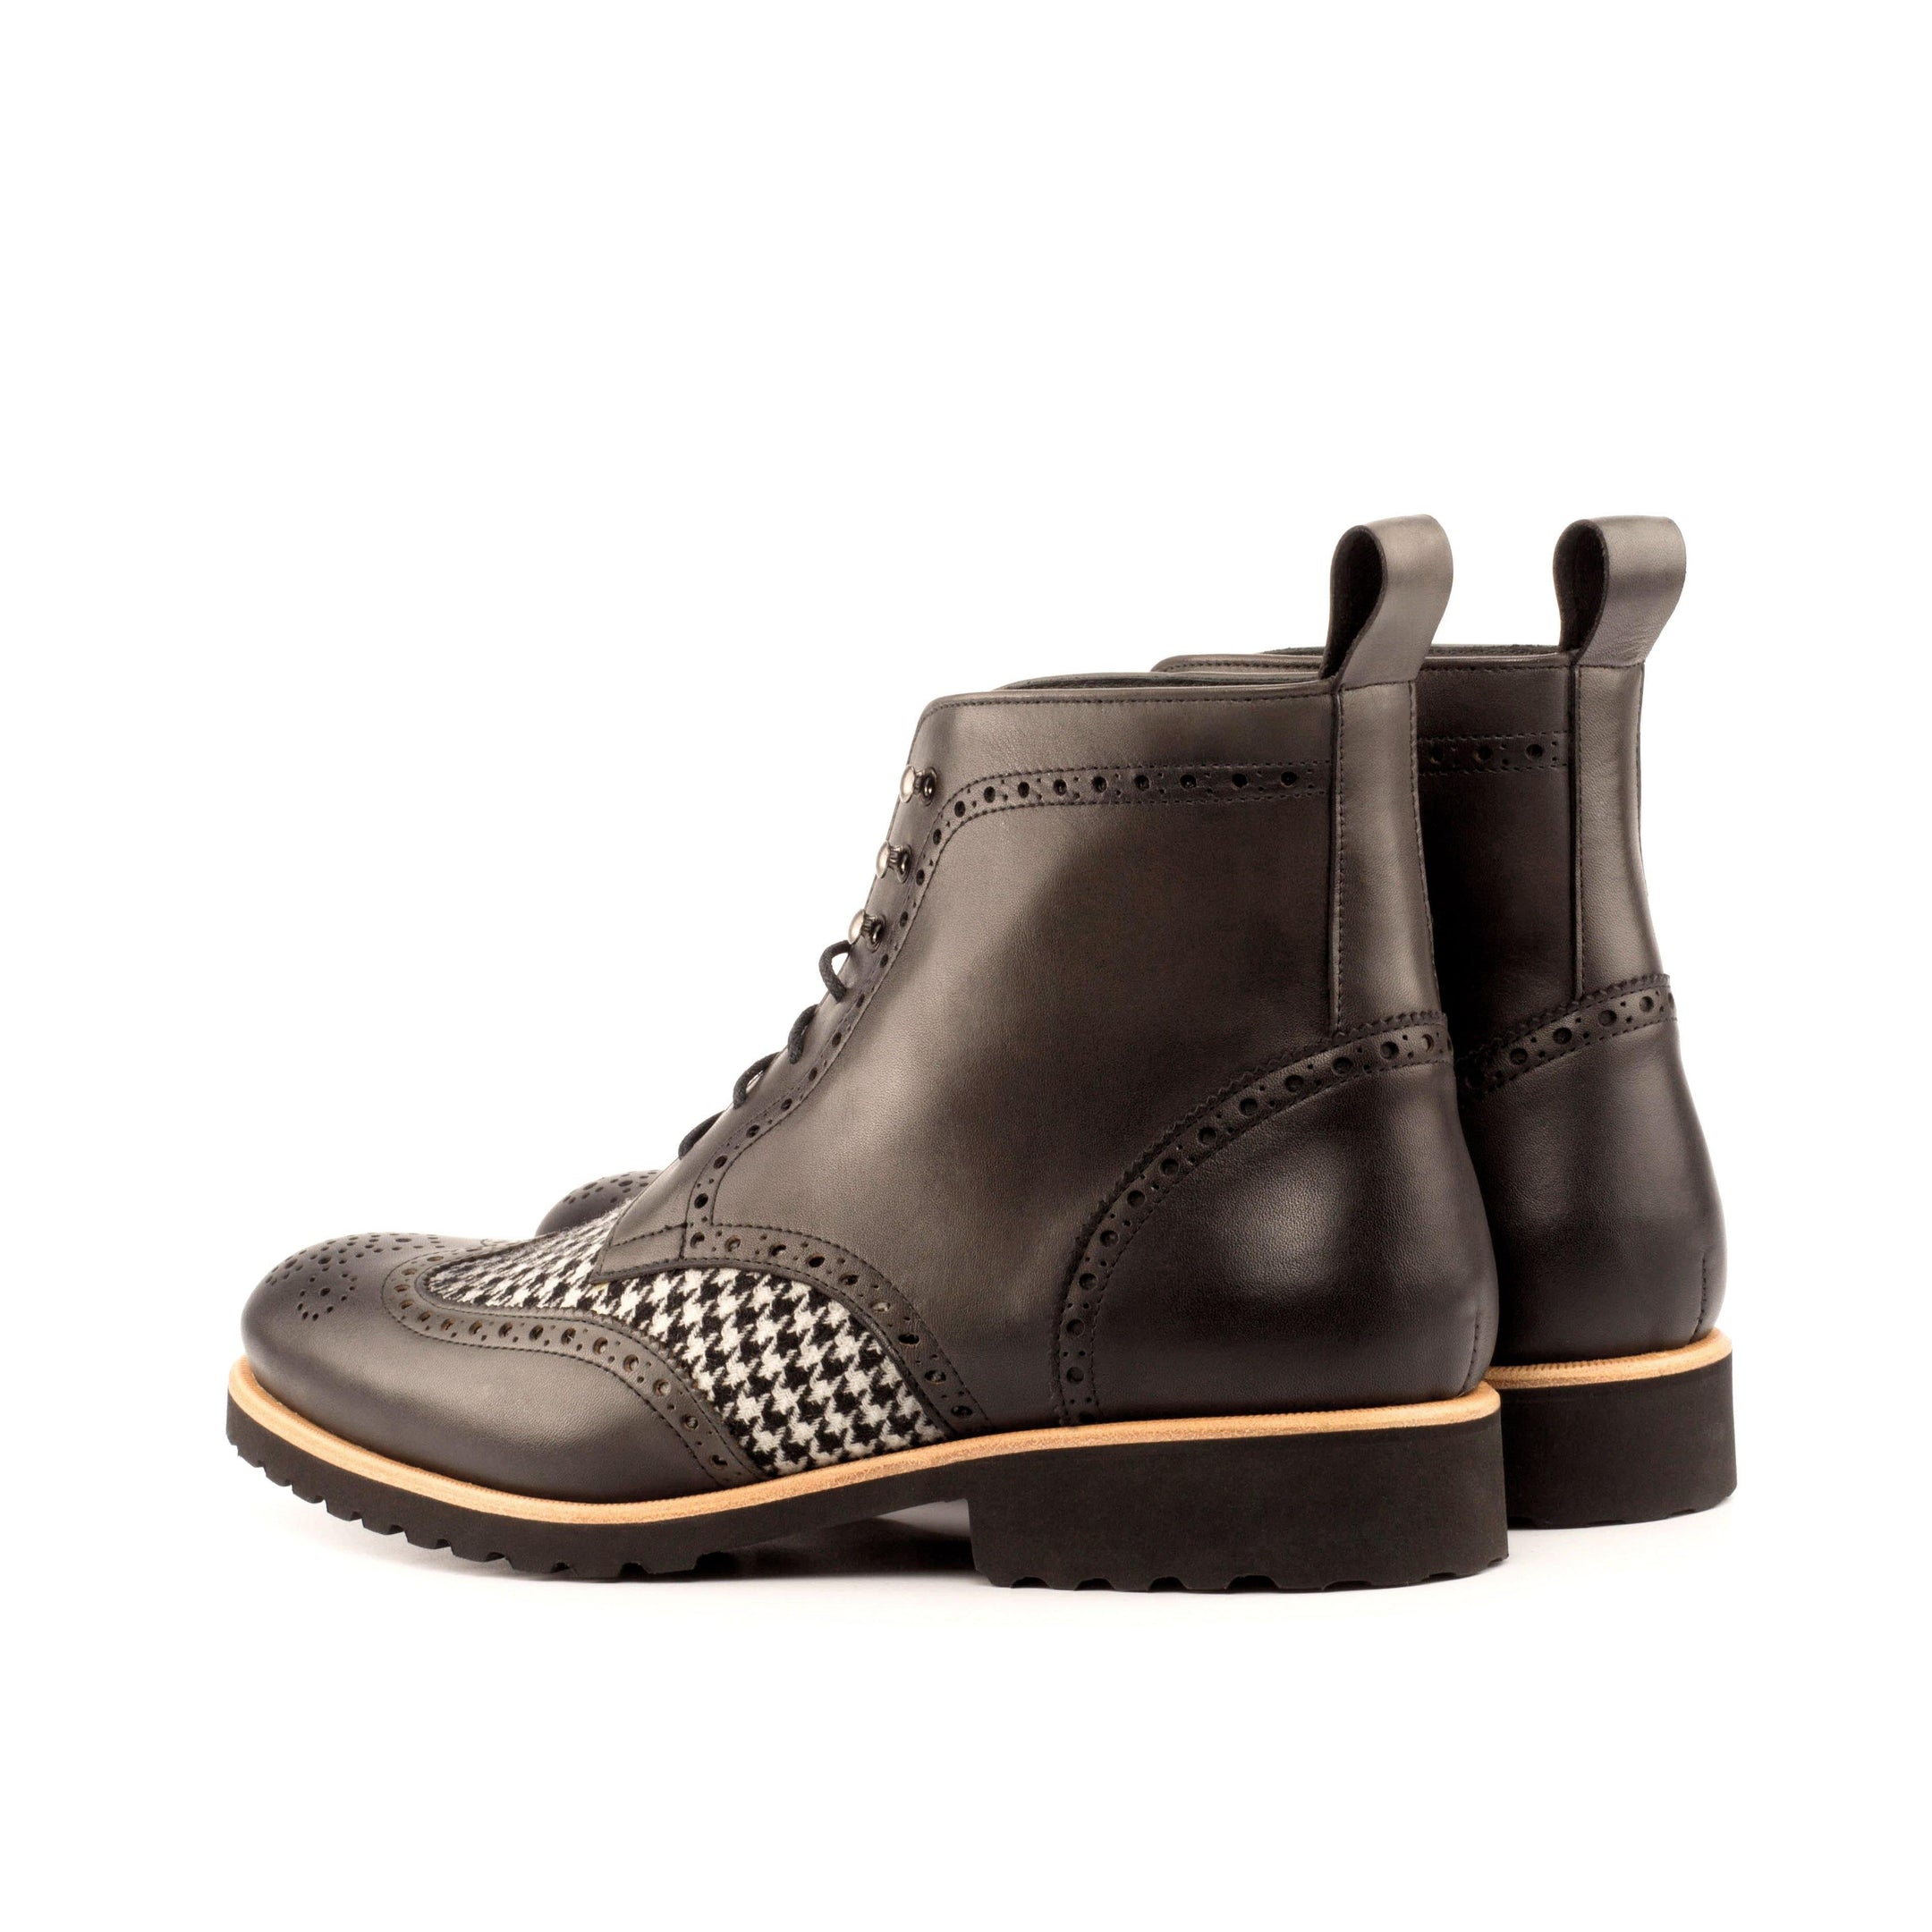 DT90 Military Brogue Boots